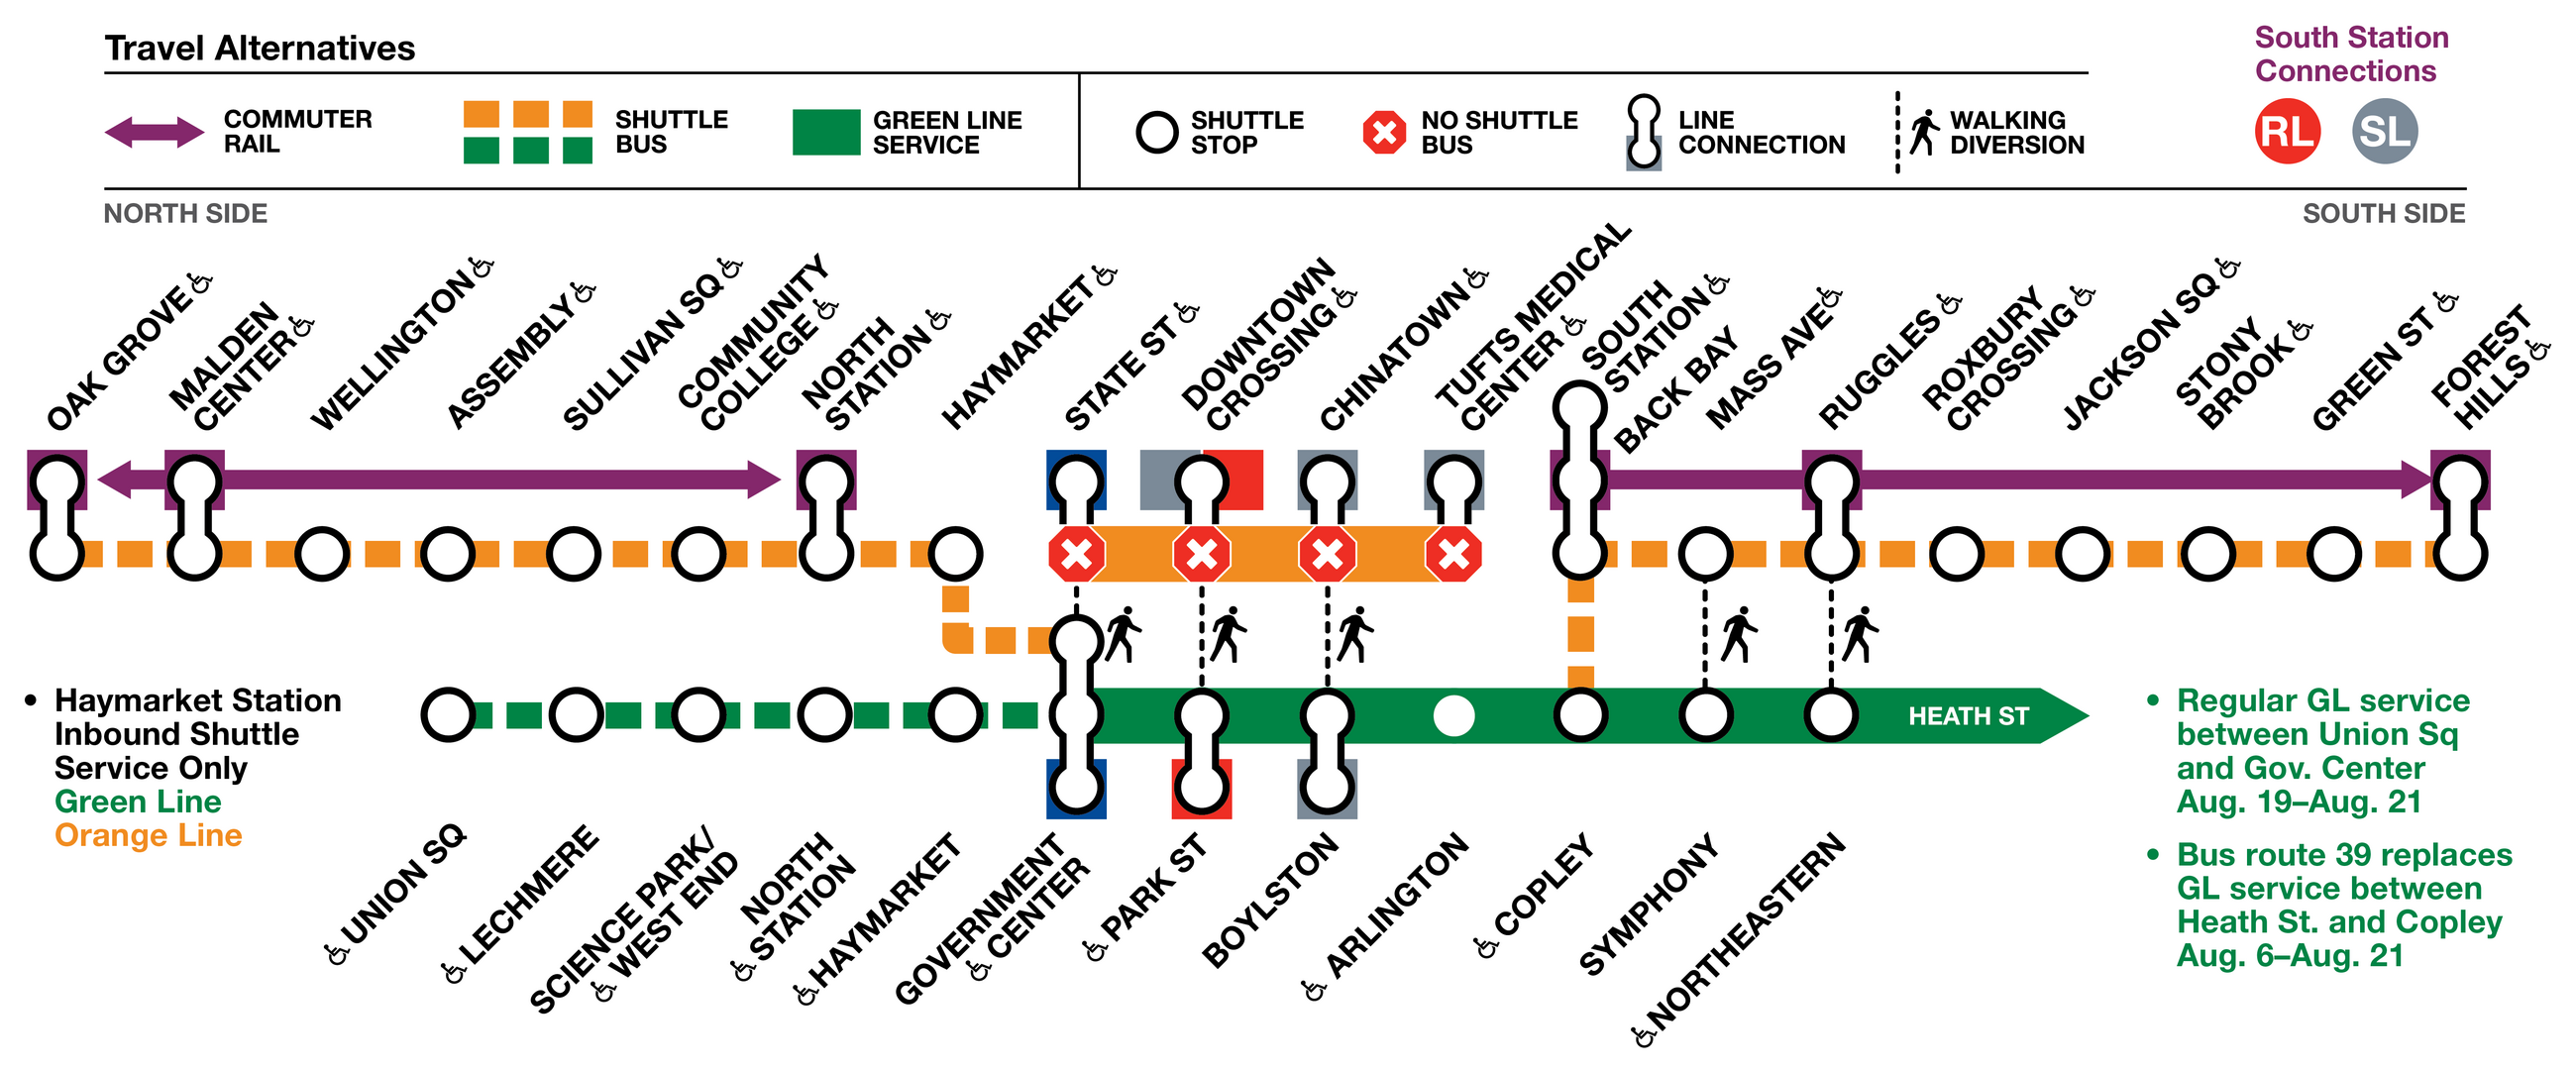 Diagram of service during 30-day Orange Line shutdown. Check below for detailed information. No shuttles or Commuter Rail service between State St and Tufts Medical Center. No outbound shuttle service at Haymarket Station. Bus route 39 will replace E Branch service between Heath St. and Copley from August 6 to August 21. Silver Line connections are available at Downtown Crossing, Chinatown, Boylston and Tufts Medical Center. Red Line service connections are available at Park St. and Downtown Crossing. 